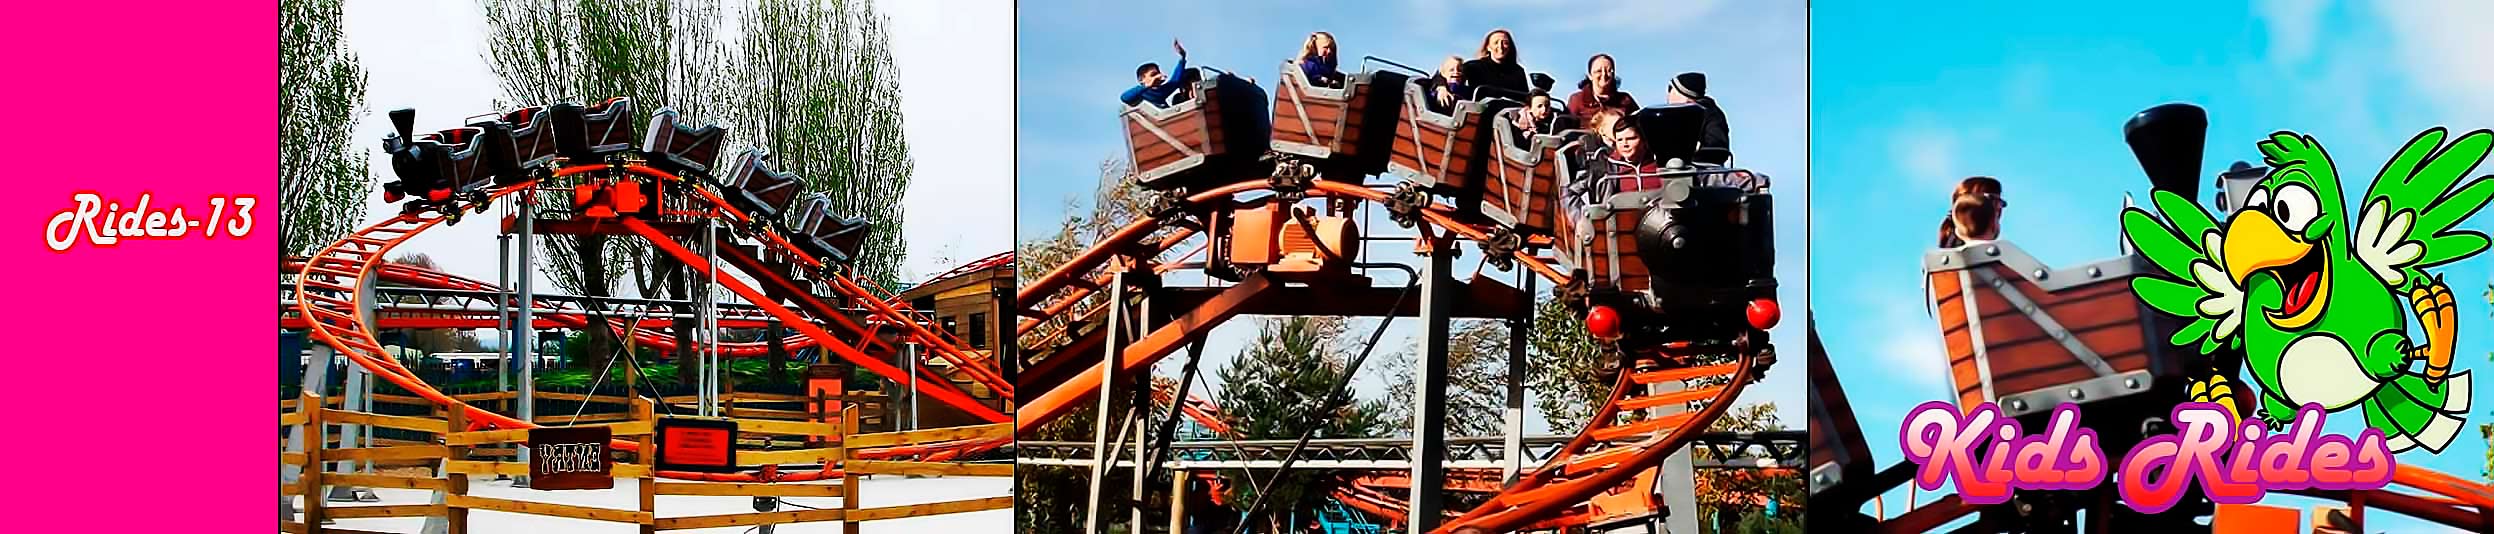 attractions _rides_rollercoasters_for theme parks _12